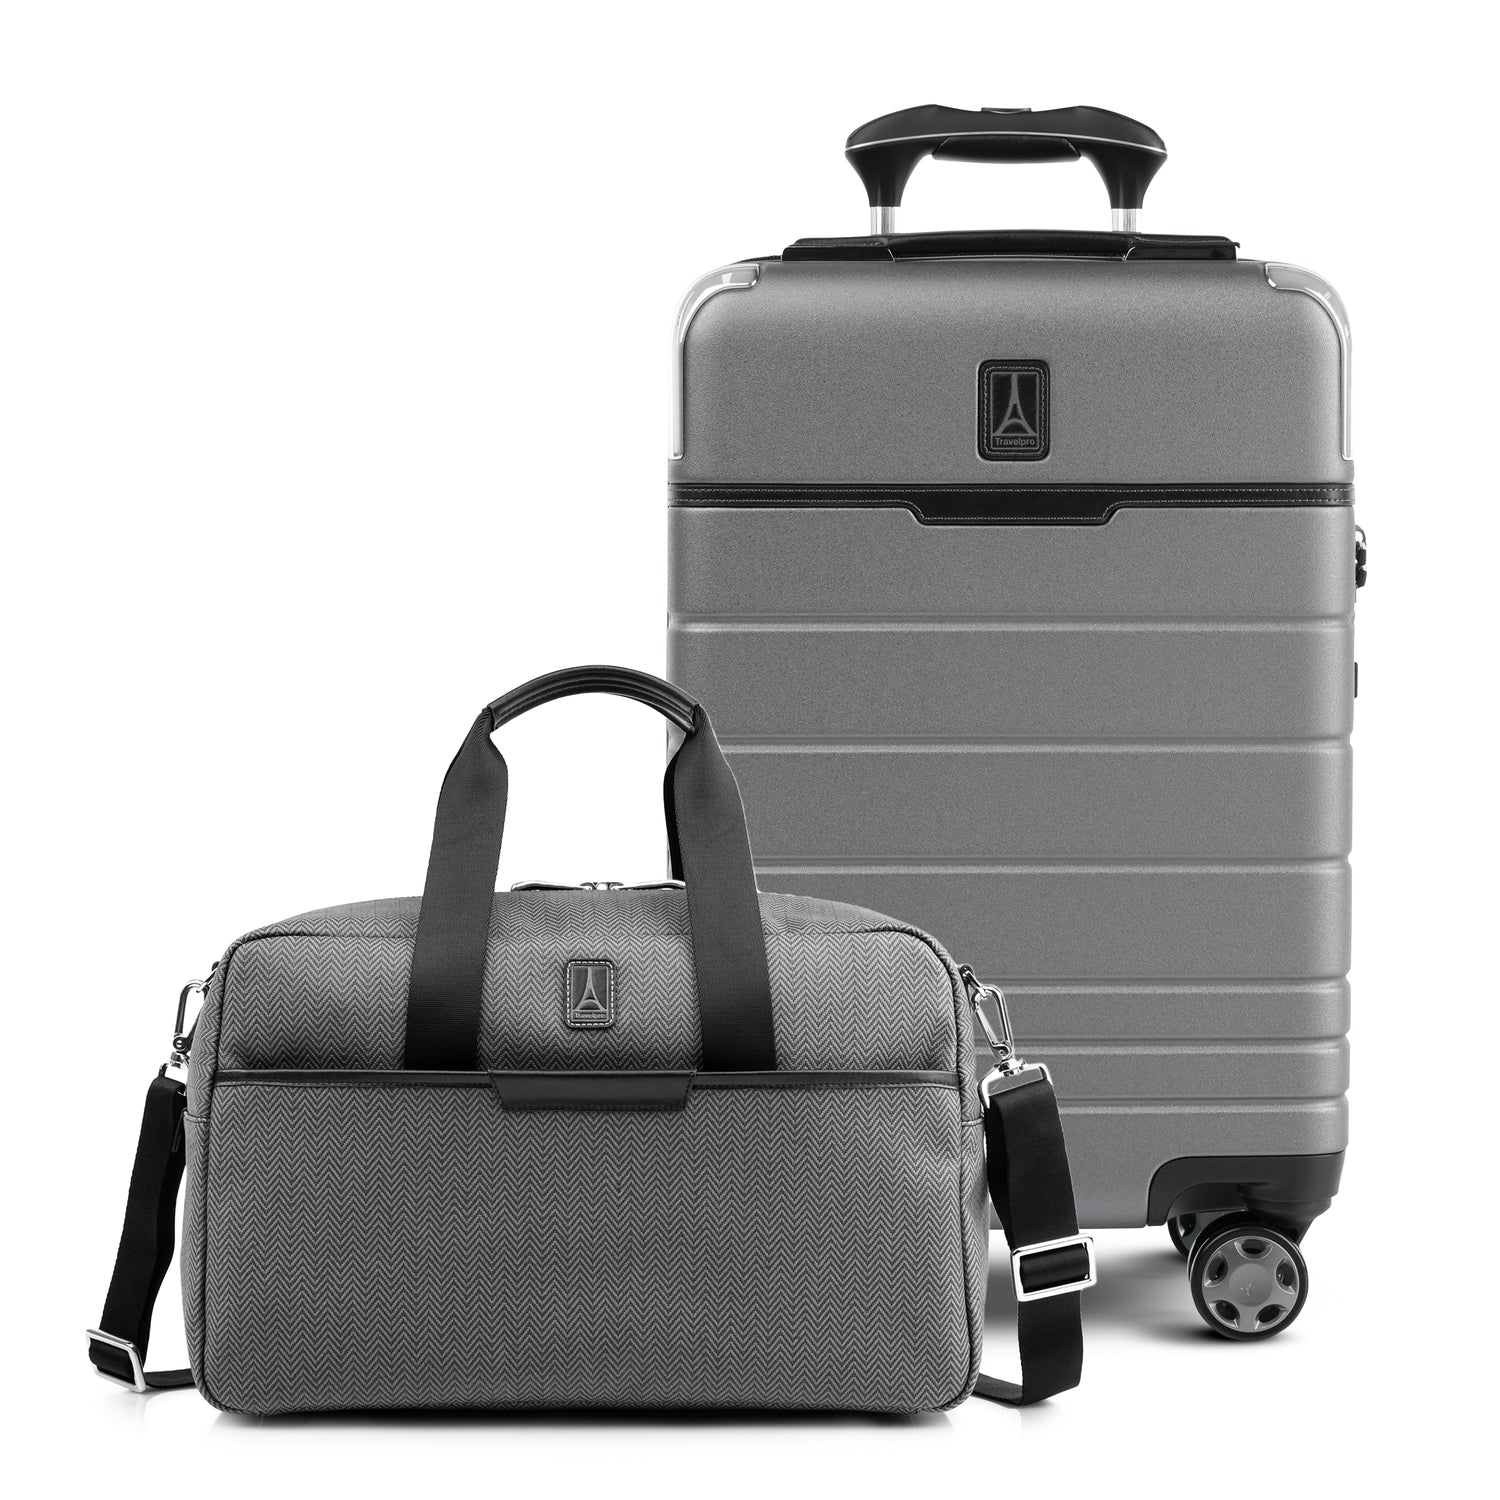 Travelpro x Travel + Leisure Compact Carry-On Spinner & Underseat Tote Bag Luggage Set in Whistler Grey | Hands-Free Mobility | Travel Suitcase